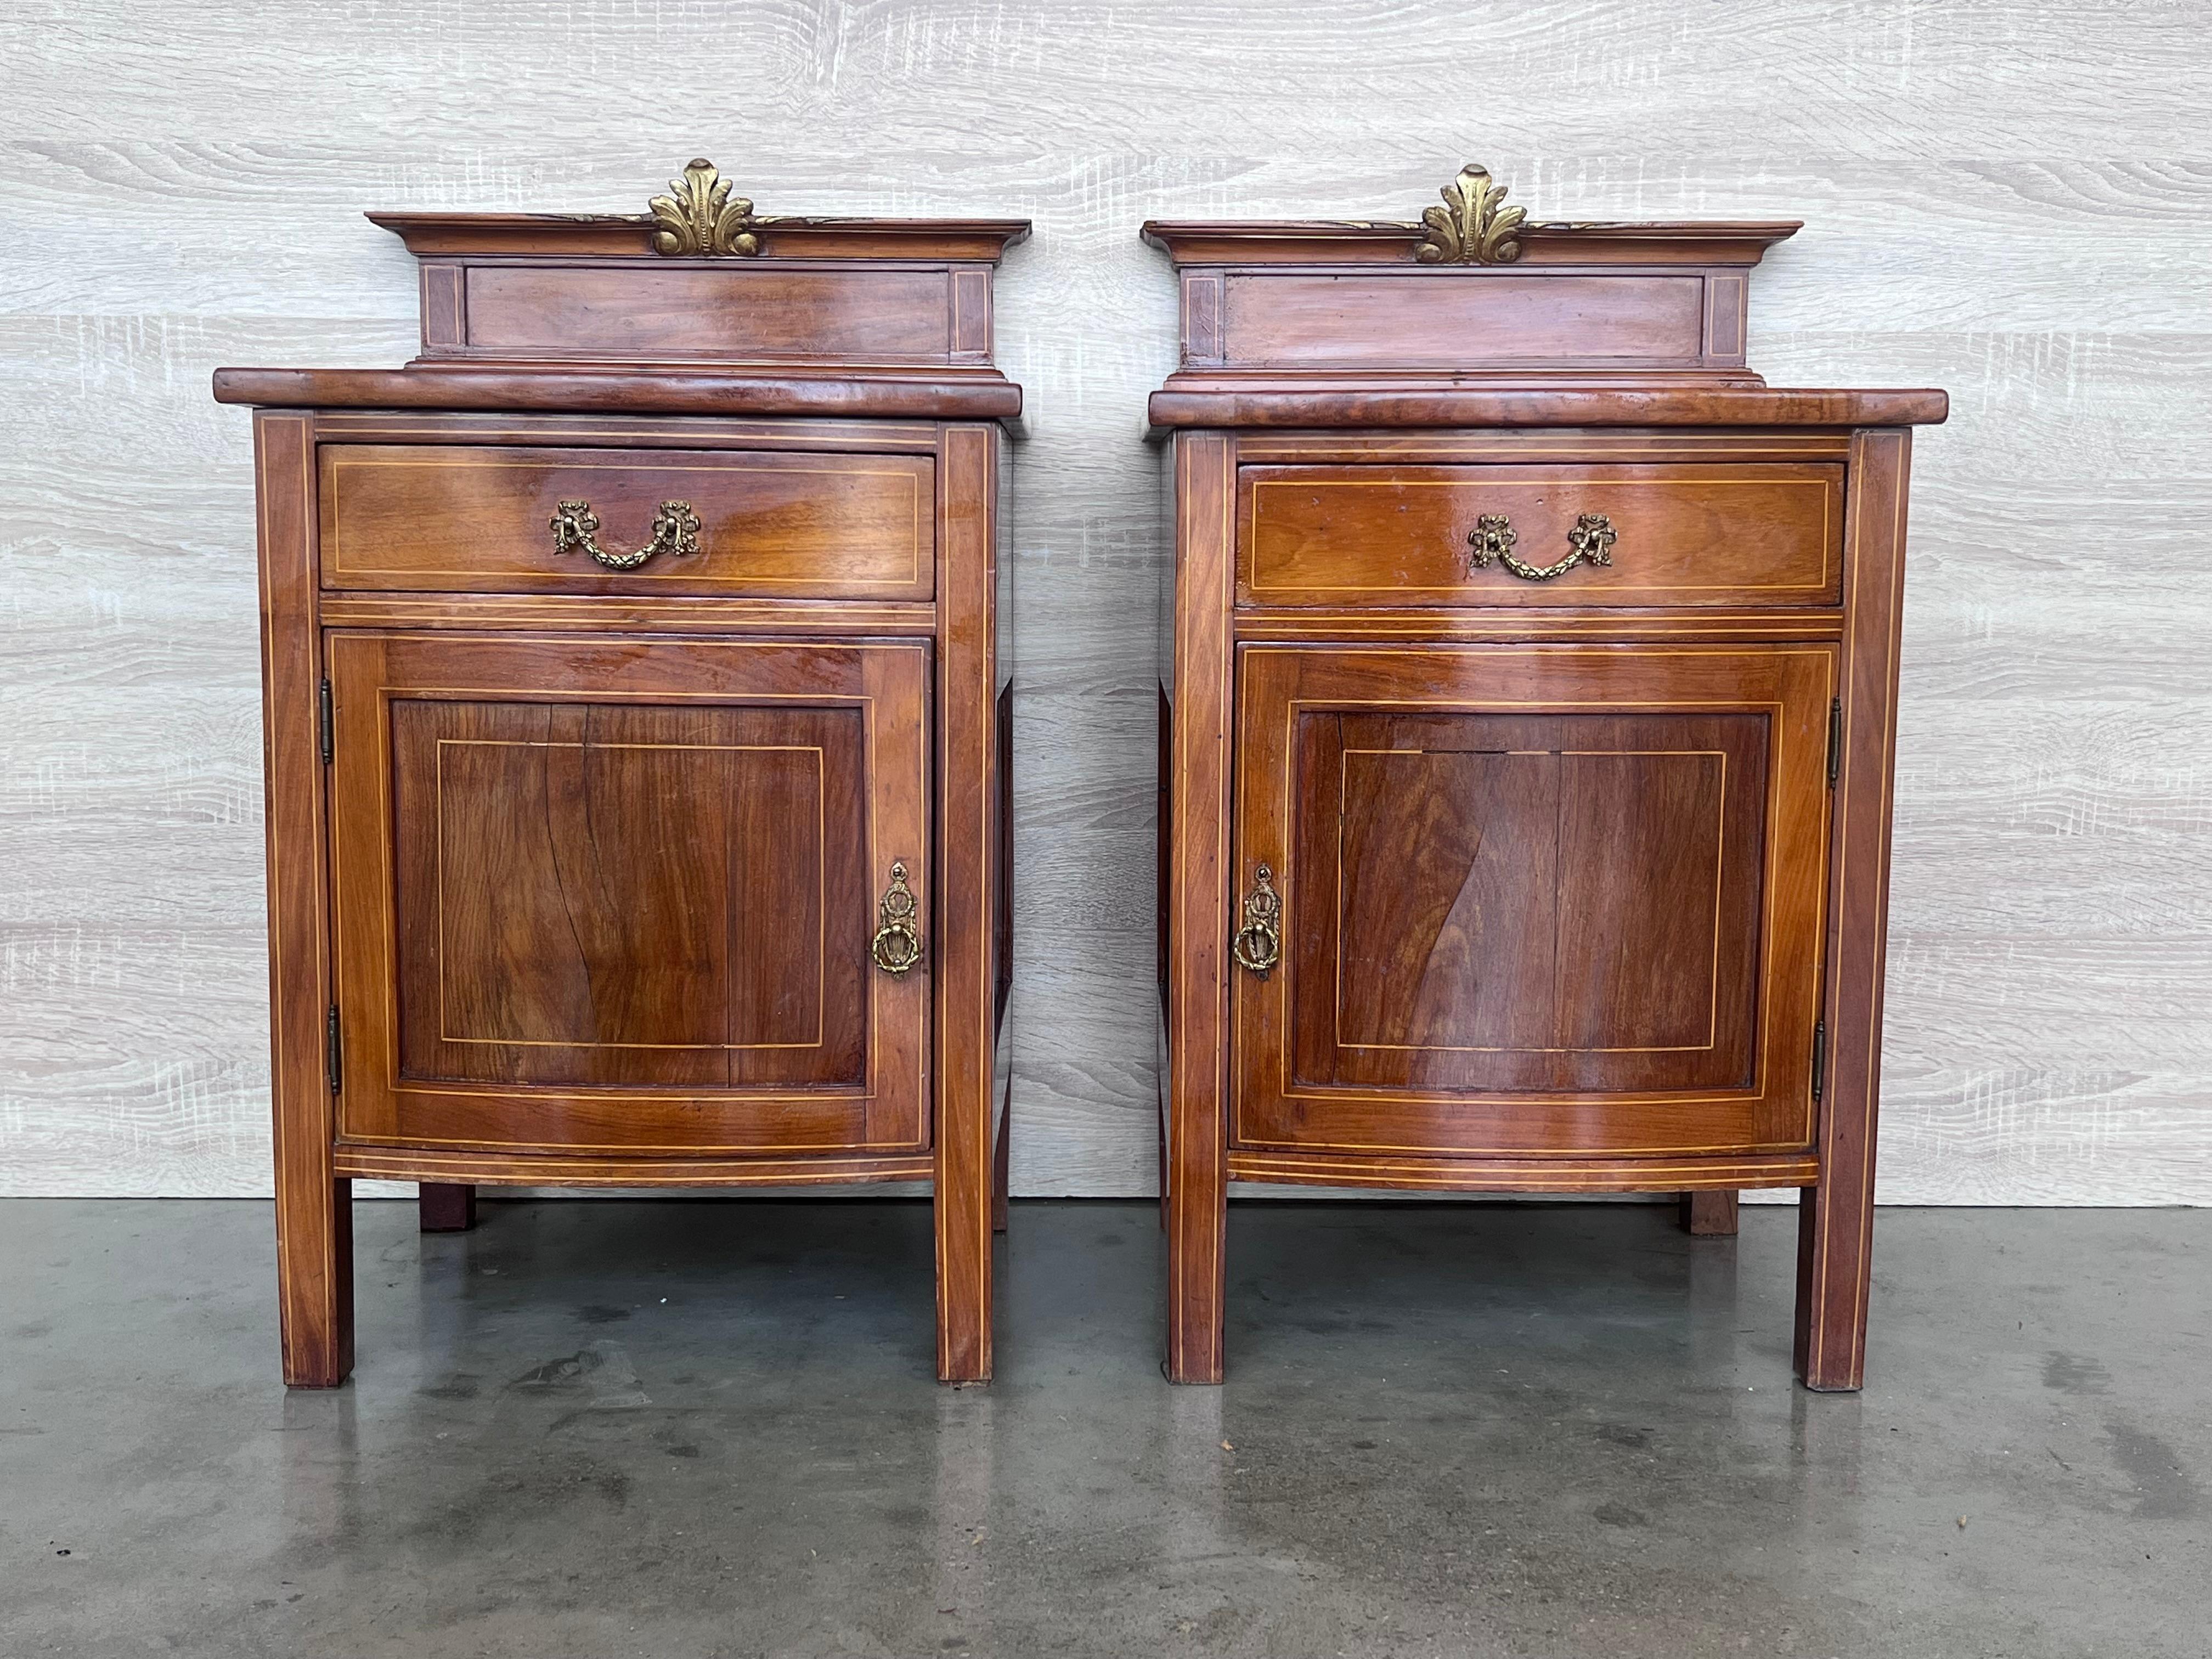 Antique French Louis XV Style satinwood one door nightstand bedside cabinet Item features beautiful wood grain, 1 swing door, tapered legs, very nice antique item, quality French craftsmanship, great style and form,

Height to the top : 22.44in.